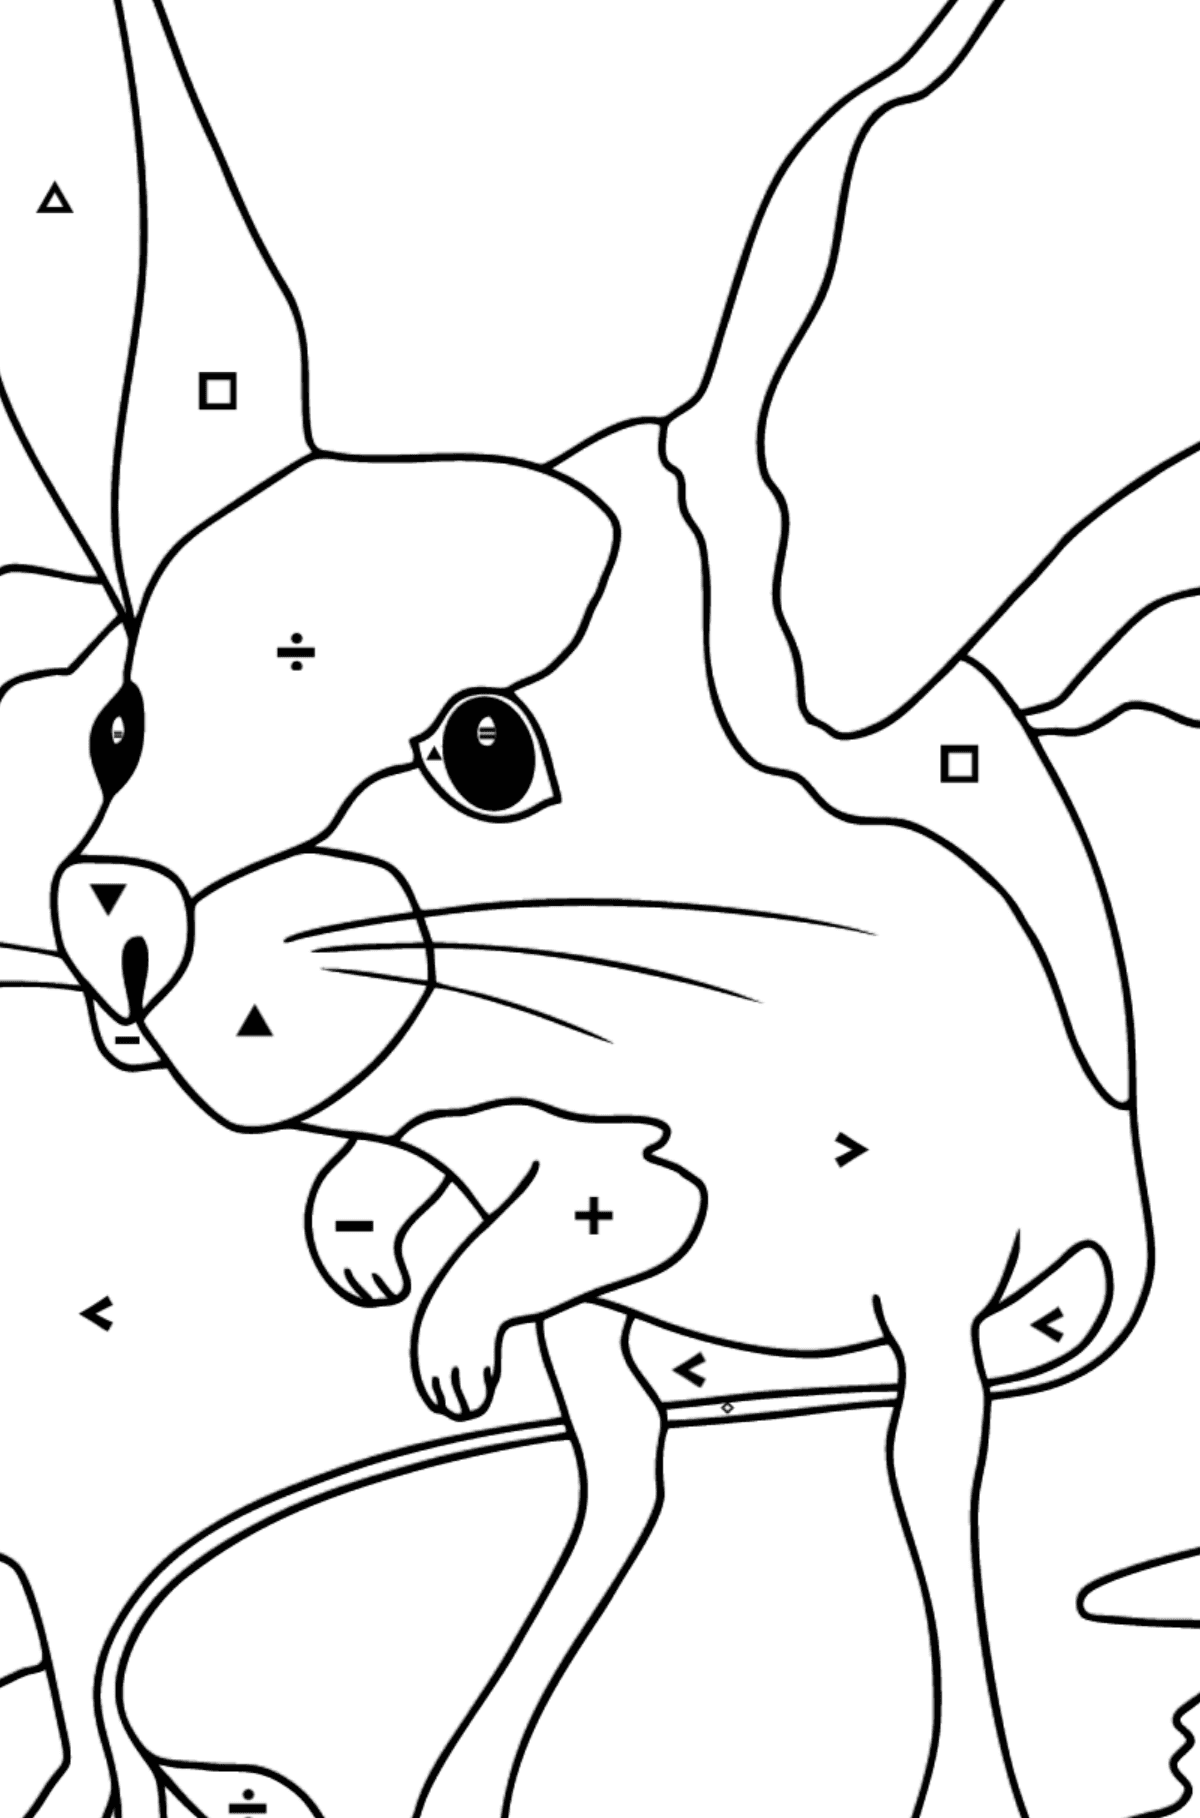 A Jerboa is Inspecting the Area Coloring Page - Coloring by Symbols for Kids